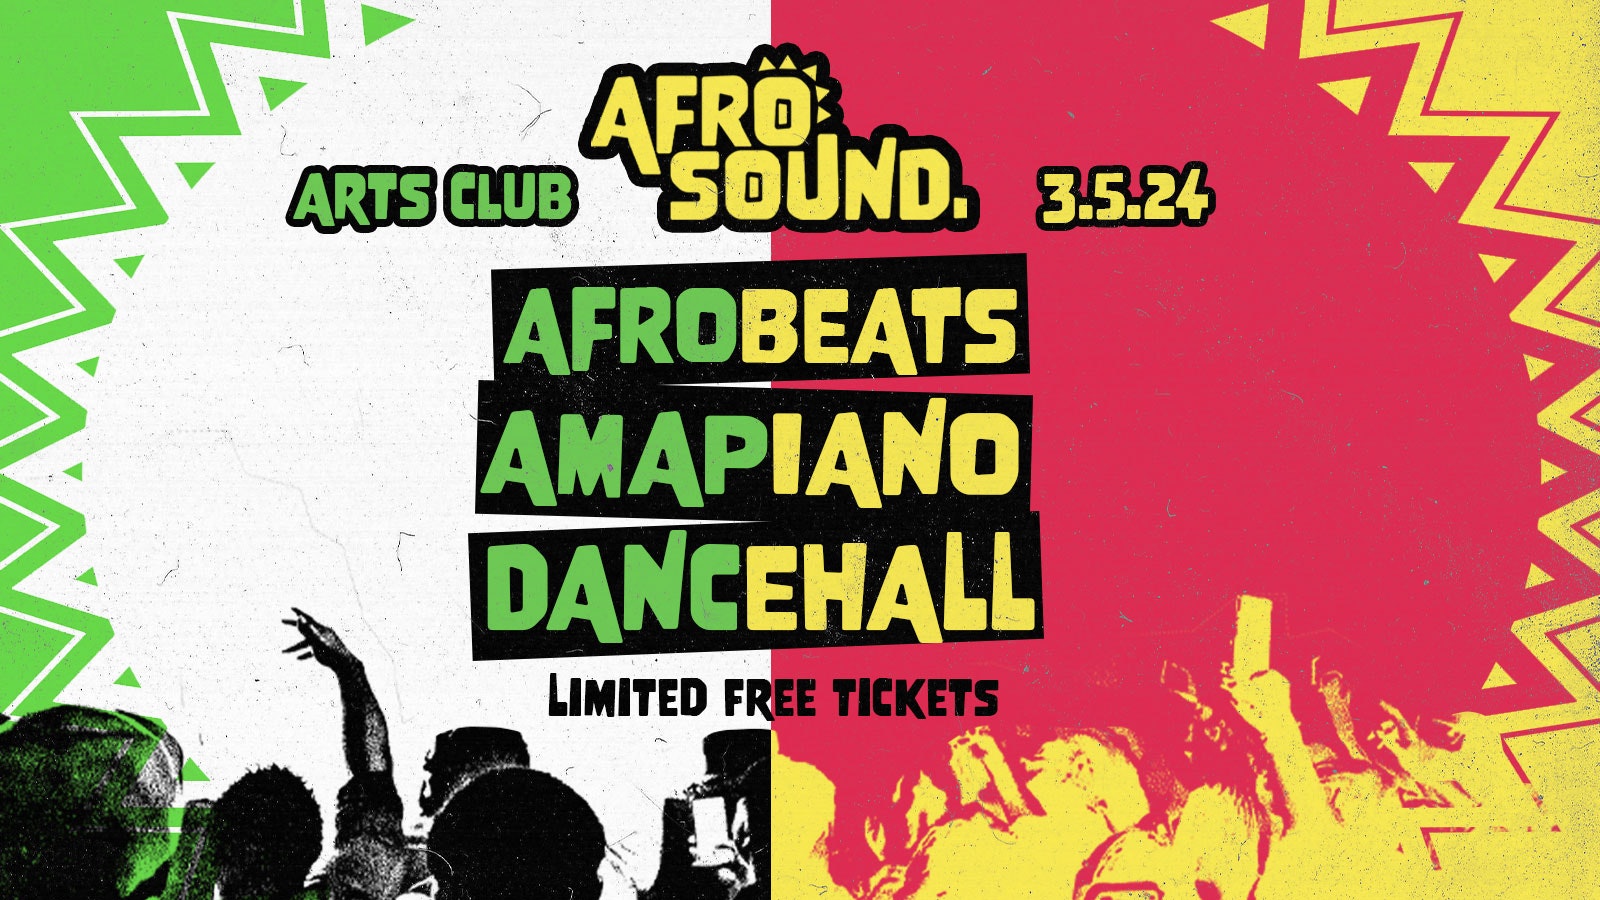 AfroSound AfroCaribbean Special – AFROBEATS, AMAPIANO & DANCEHALL 🌍🇯🇲 (LMTD. FREE TICKETS AVAIL)